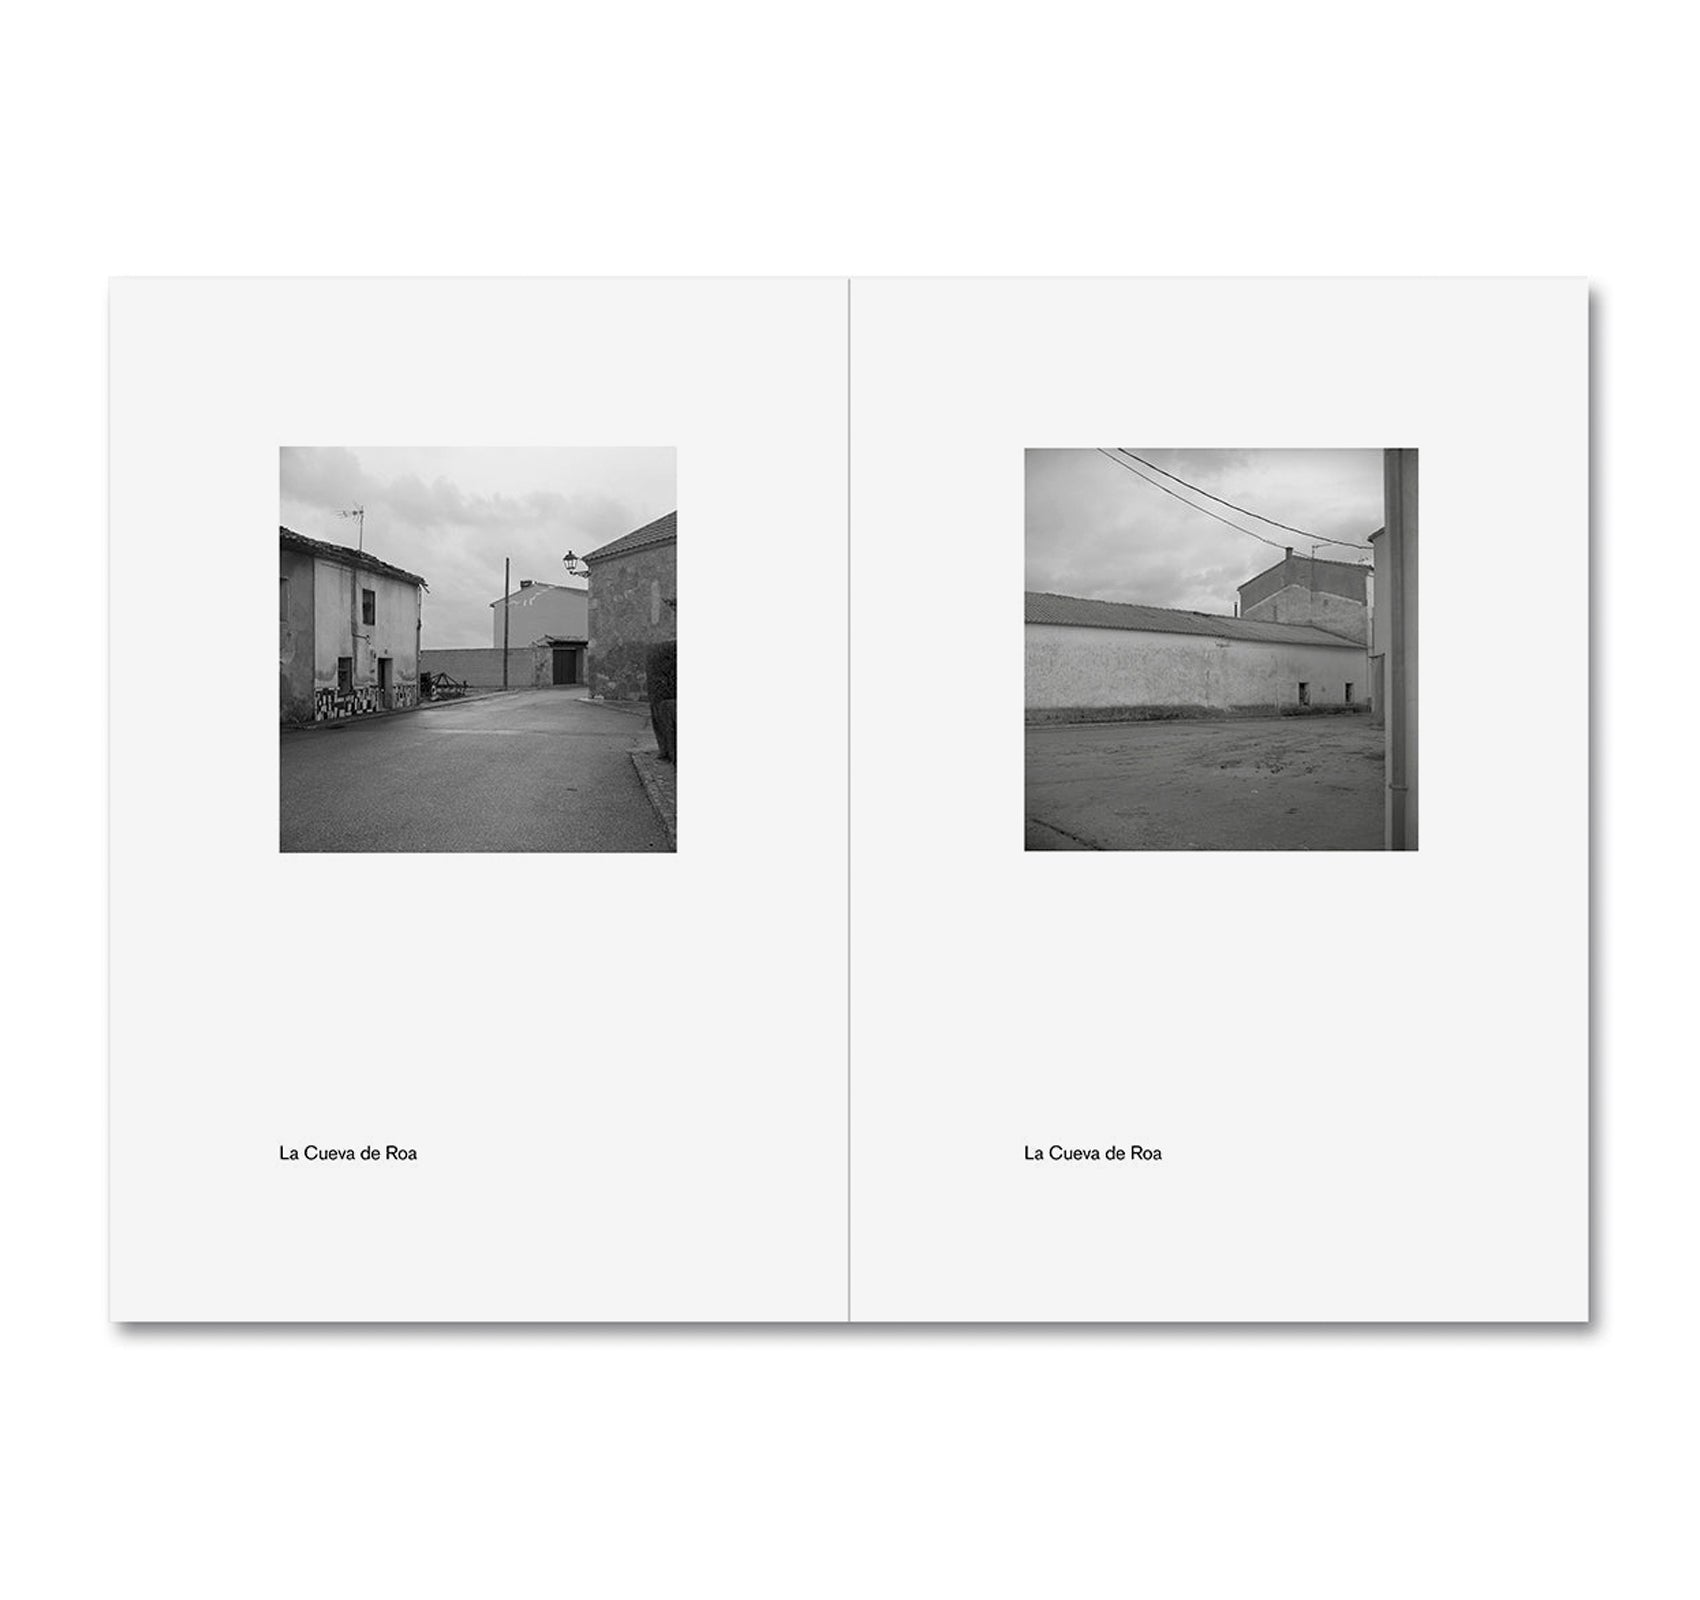 SPANISH SUMMER by Gerry Johansson [SPECIAL EDITION]